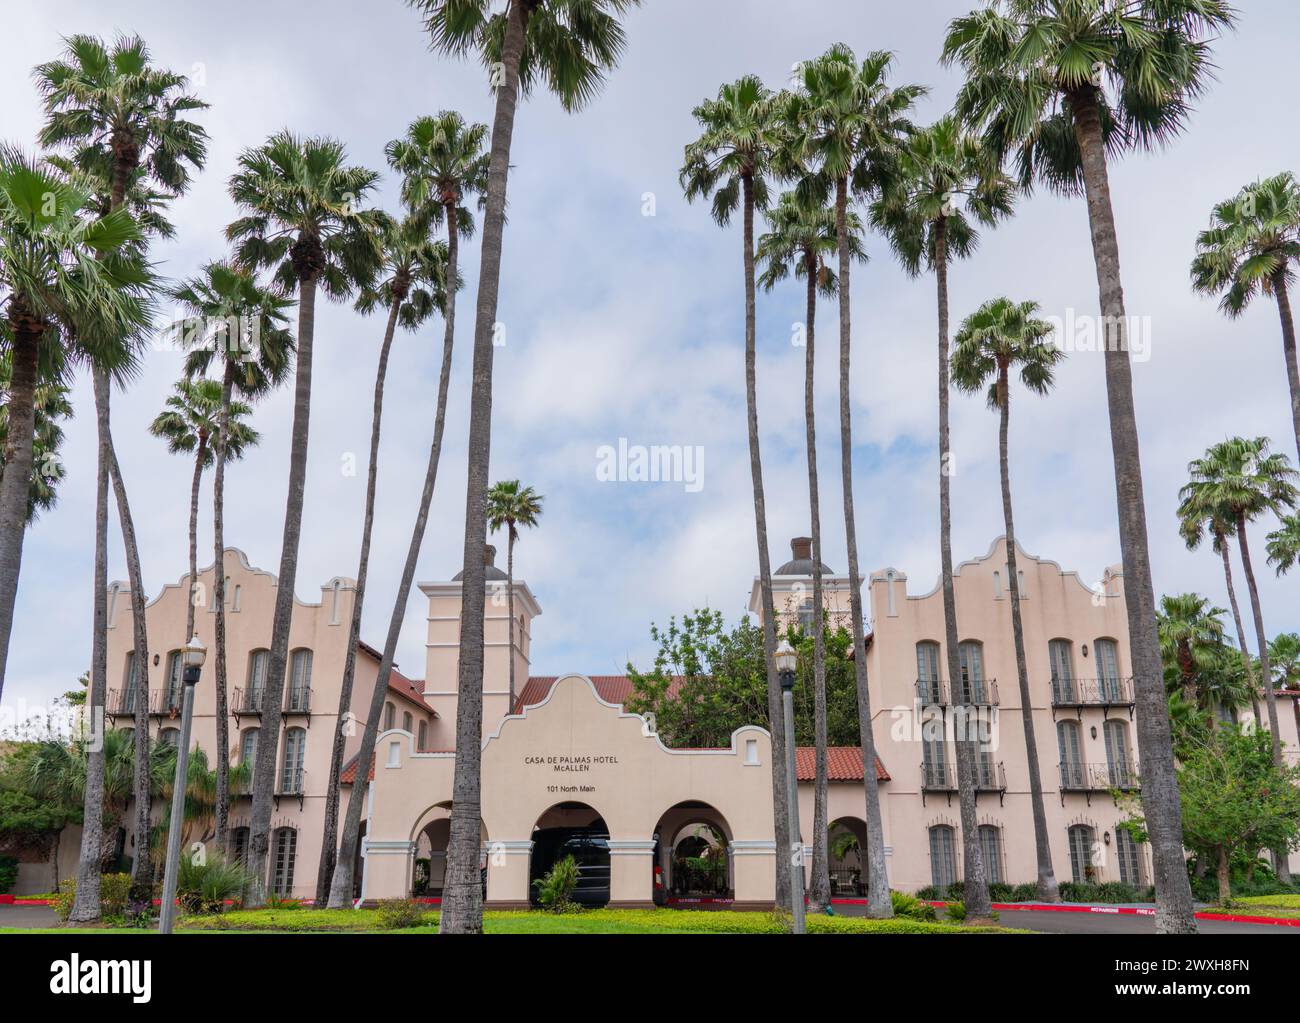 Tall palm trees in front of Casa de Palmas Hotel, a historic hotel on Main Street in downtown McAllen, Hidalgo County, Texas, USA. Stock Photo